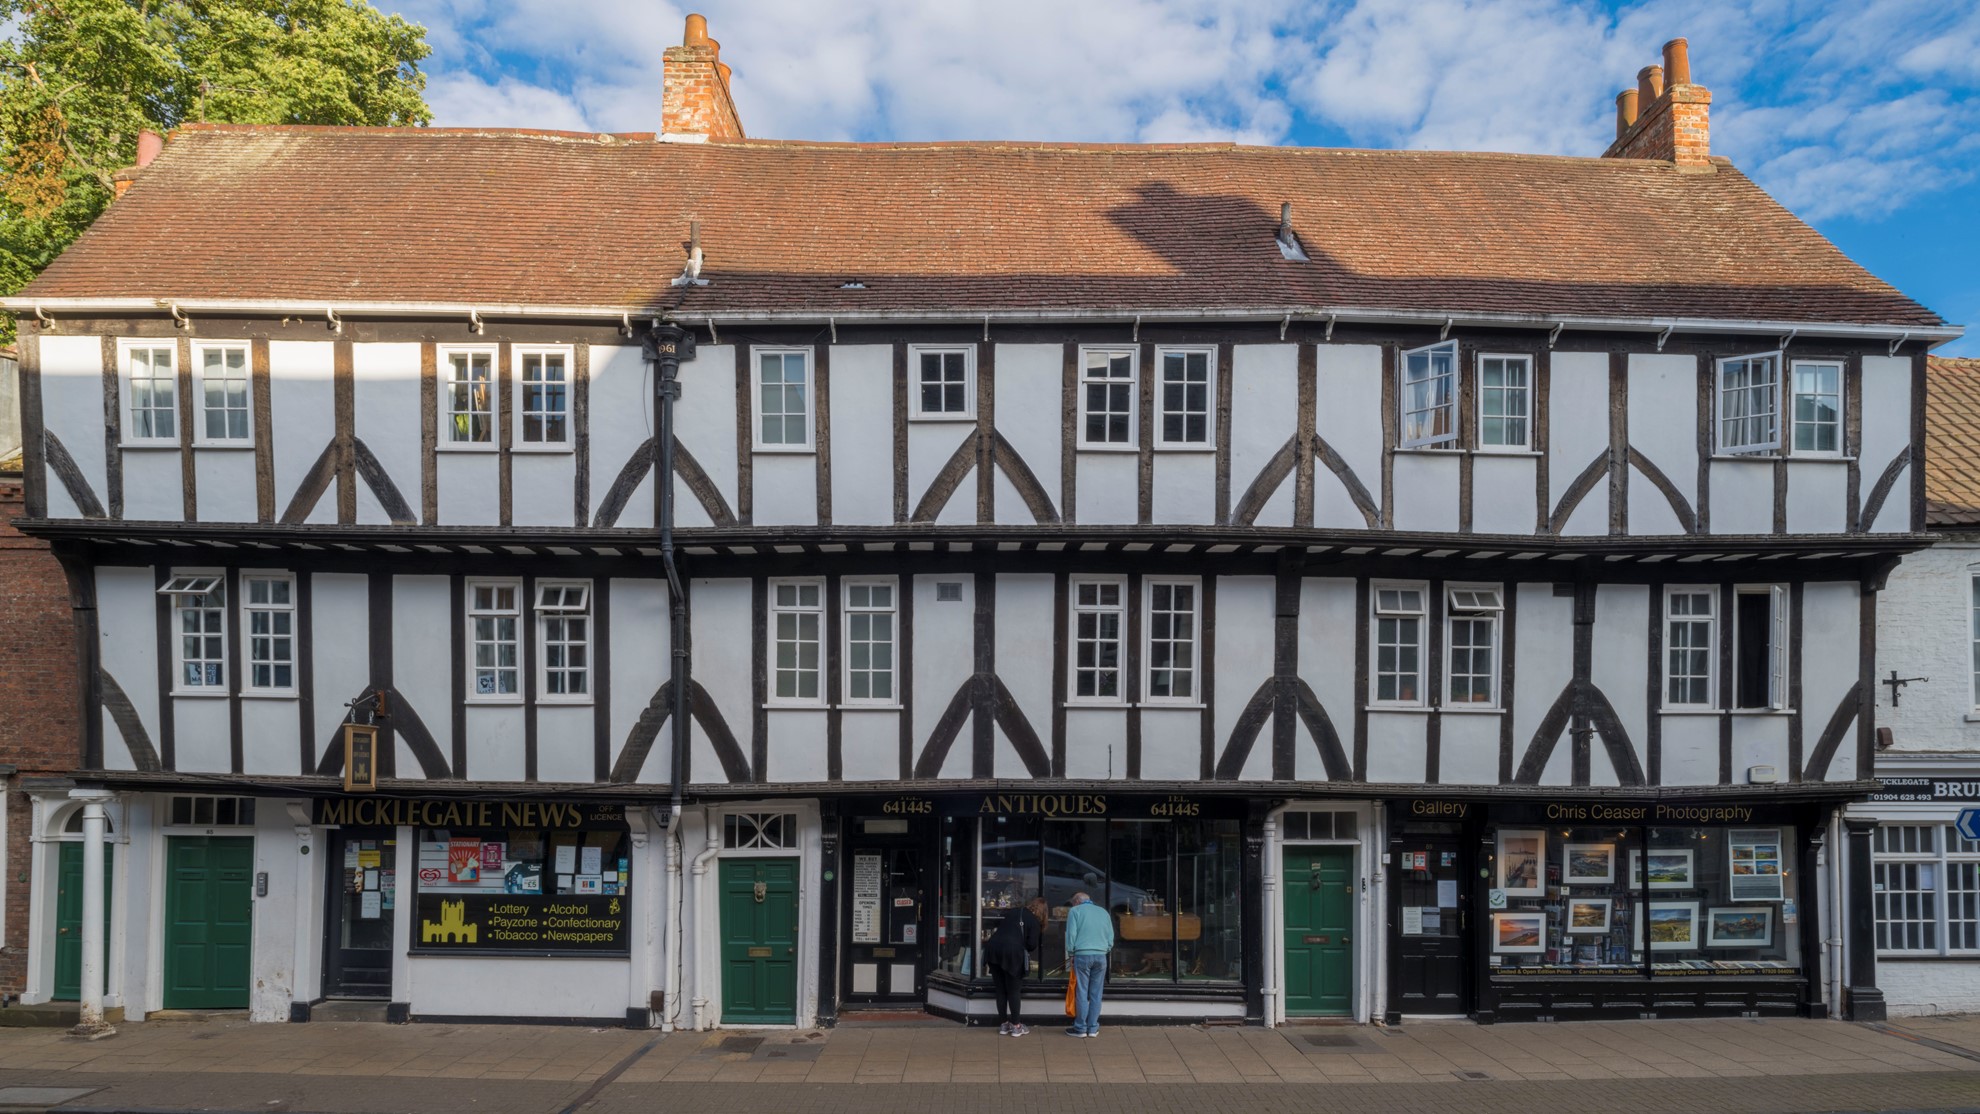 No 85, No 87, No 89 Micklegate, York Tudor building | York Conservation Trust | People and place